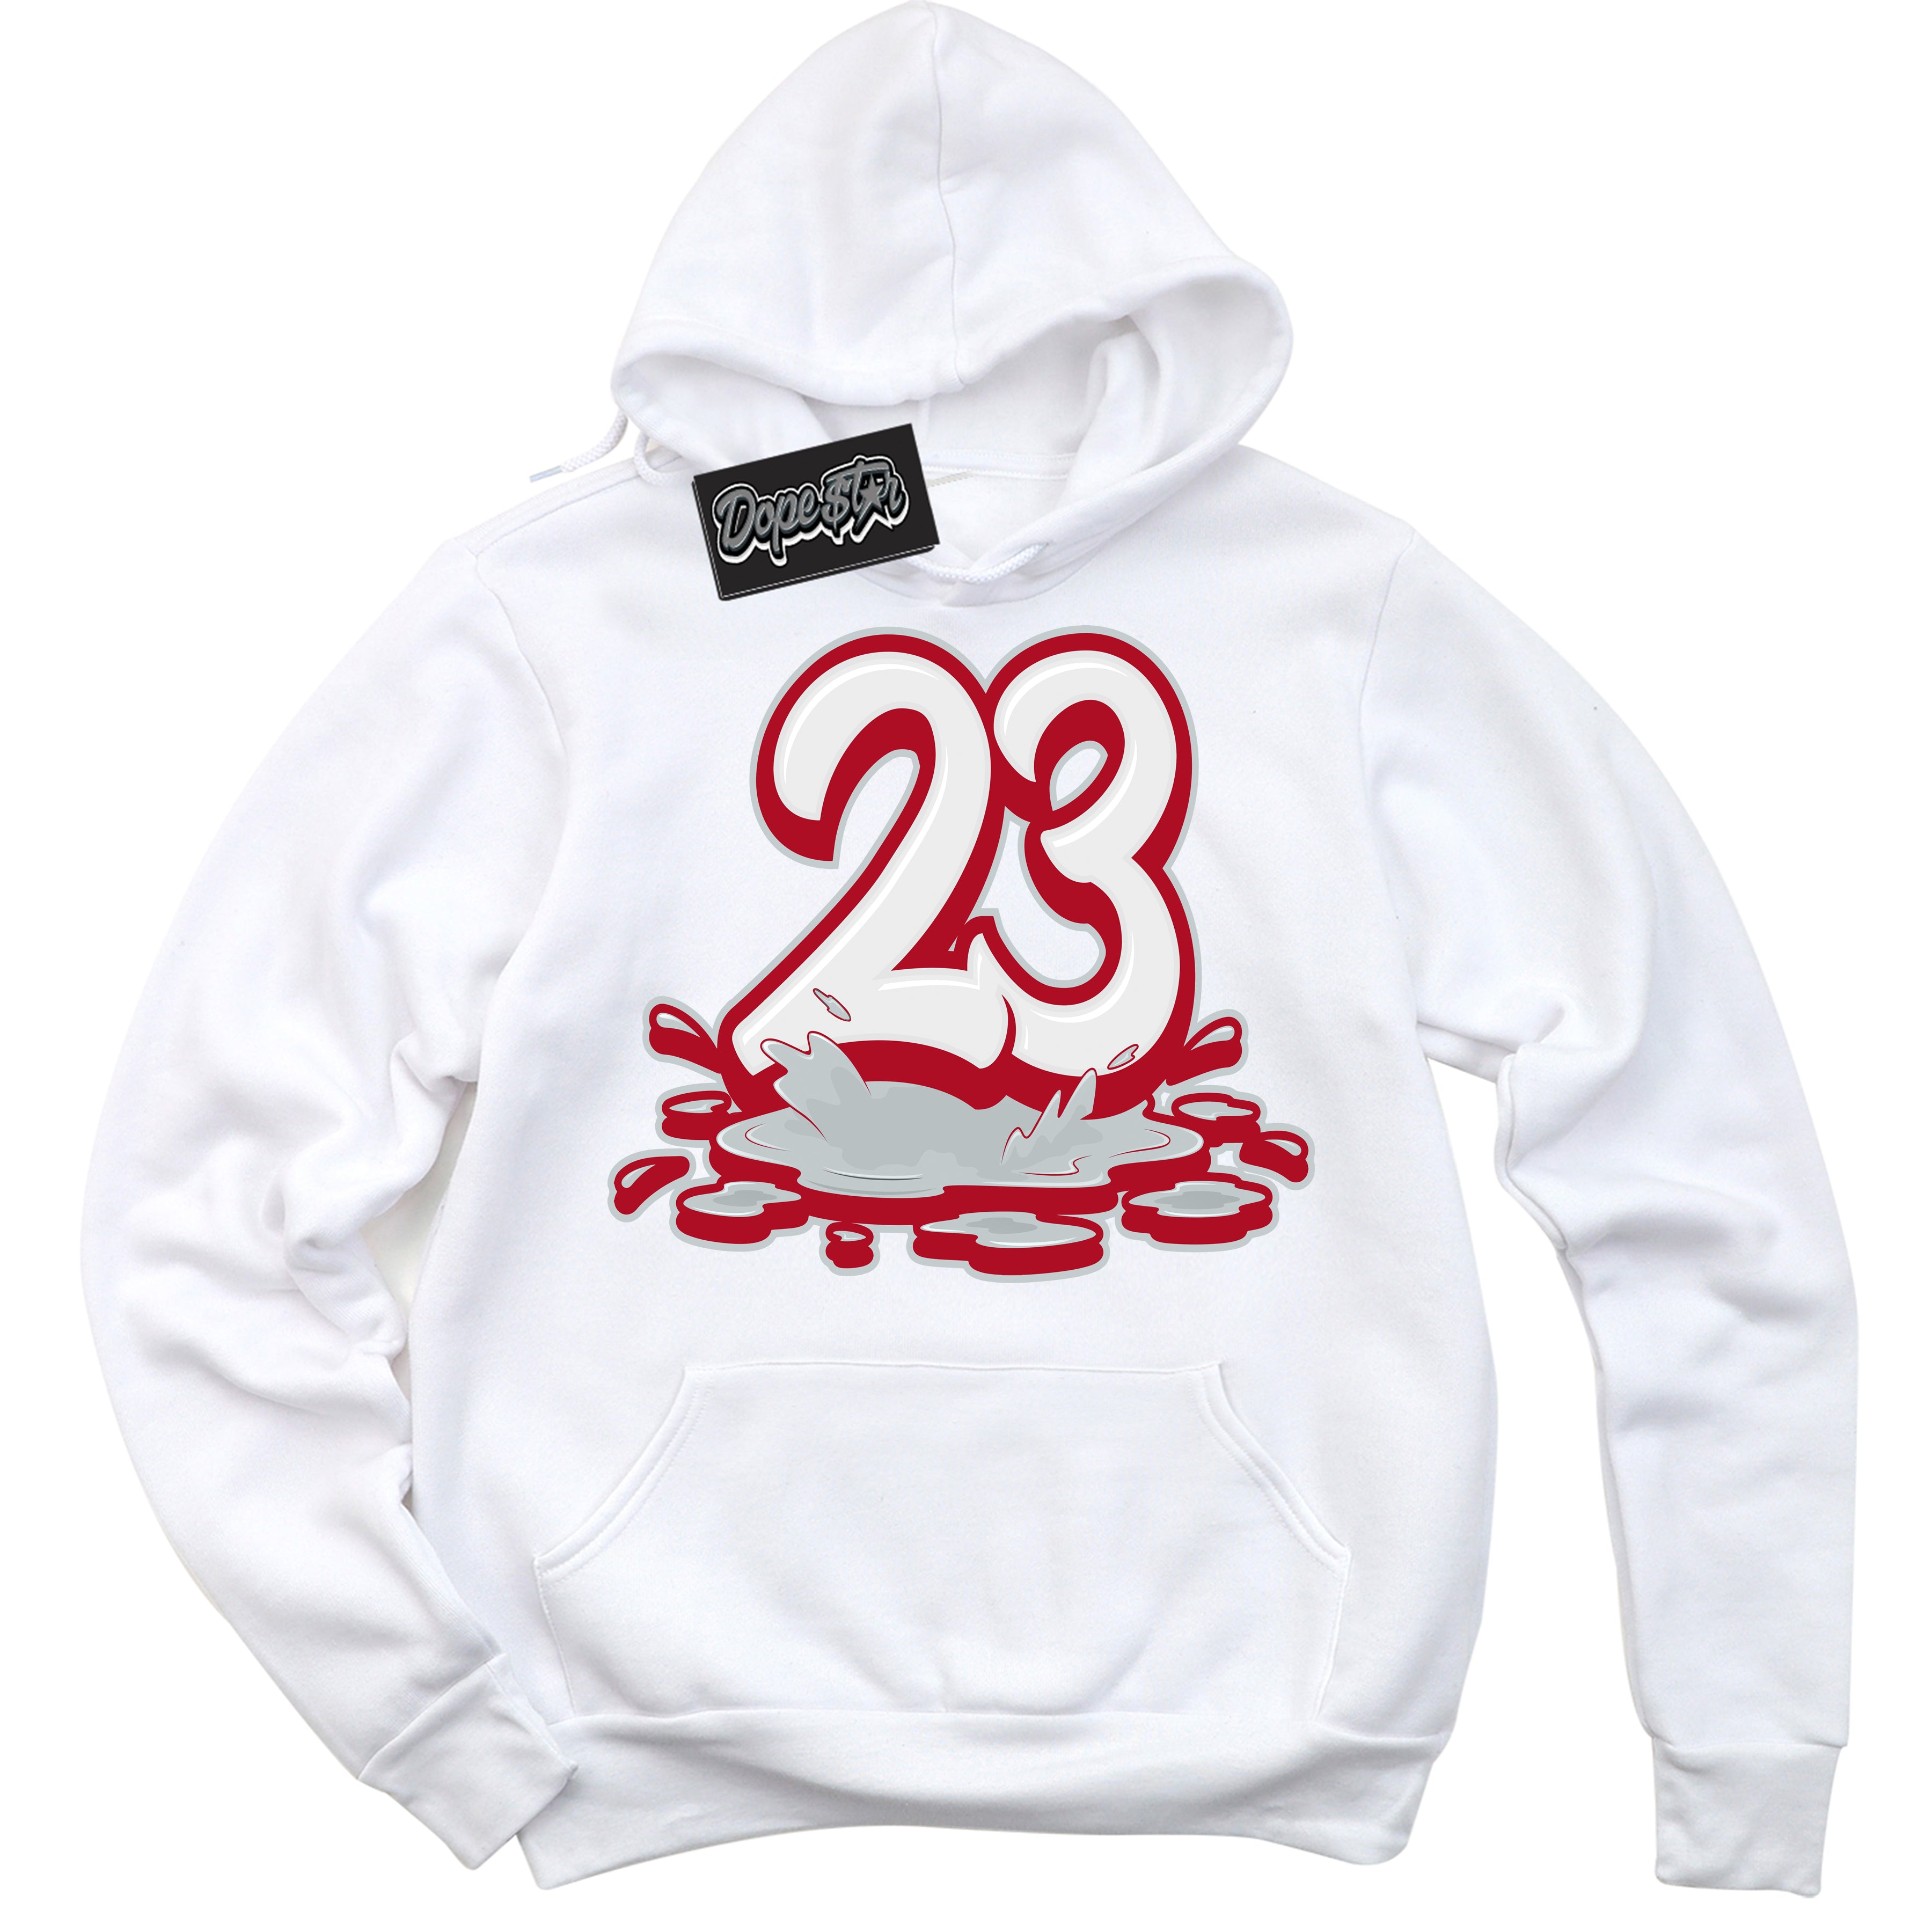 Cool White Hoodie with “ 23 Melting ”  design that Perfectly Matches  Reverse Ultraman Sneakers.